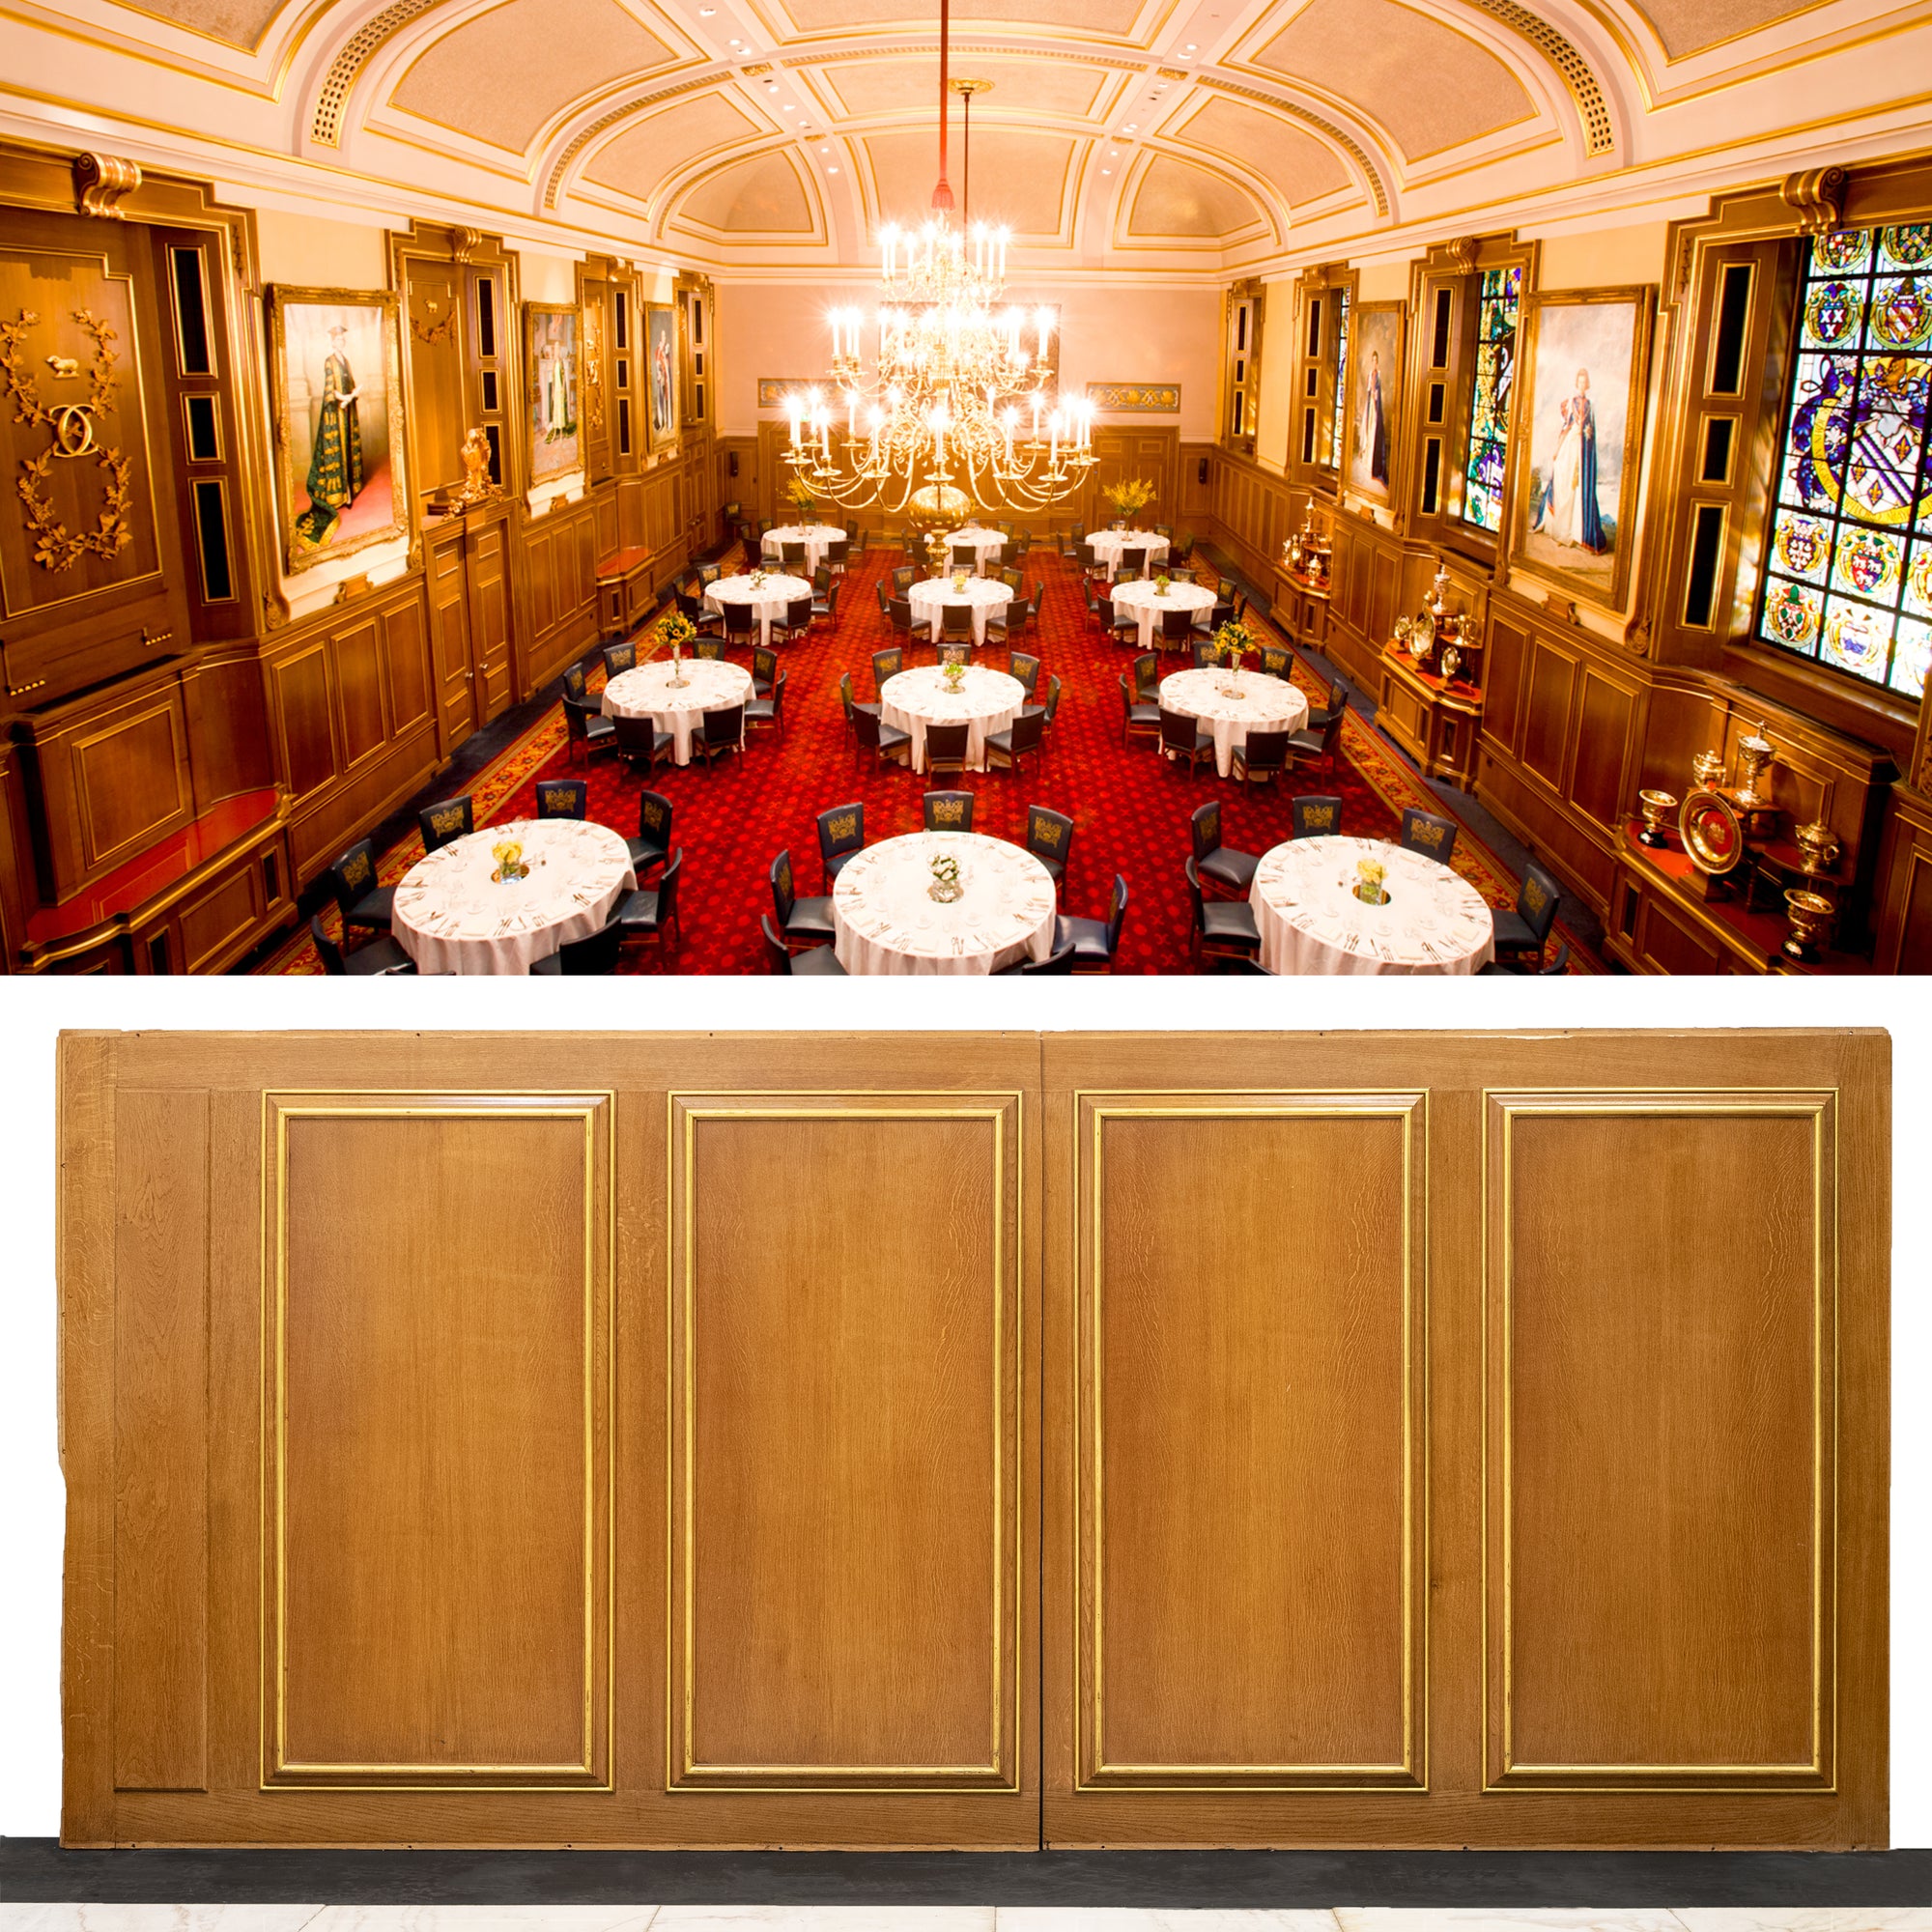 Oak Panelling With Gold Gilding | Clothworkers' Hall London | The Architectural Forum